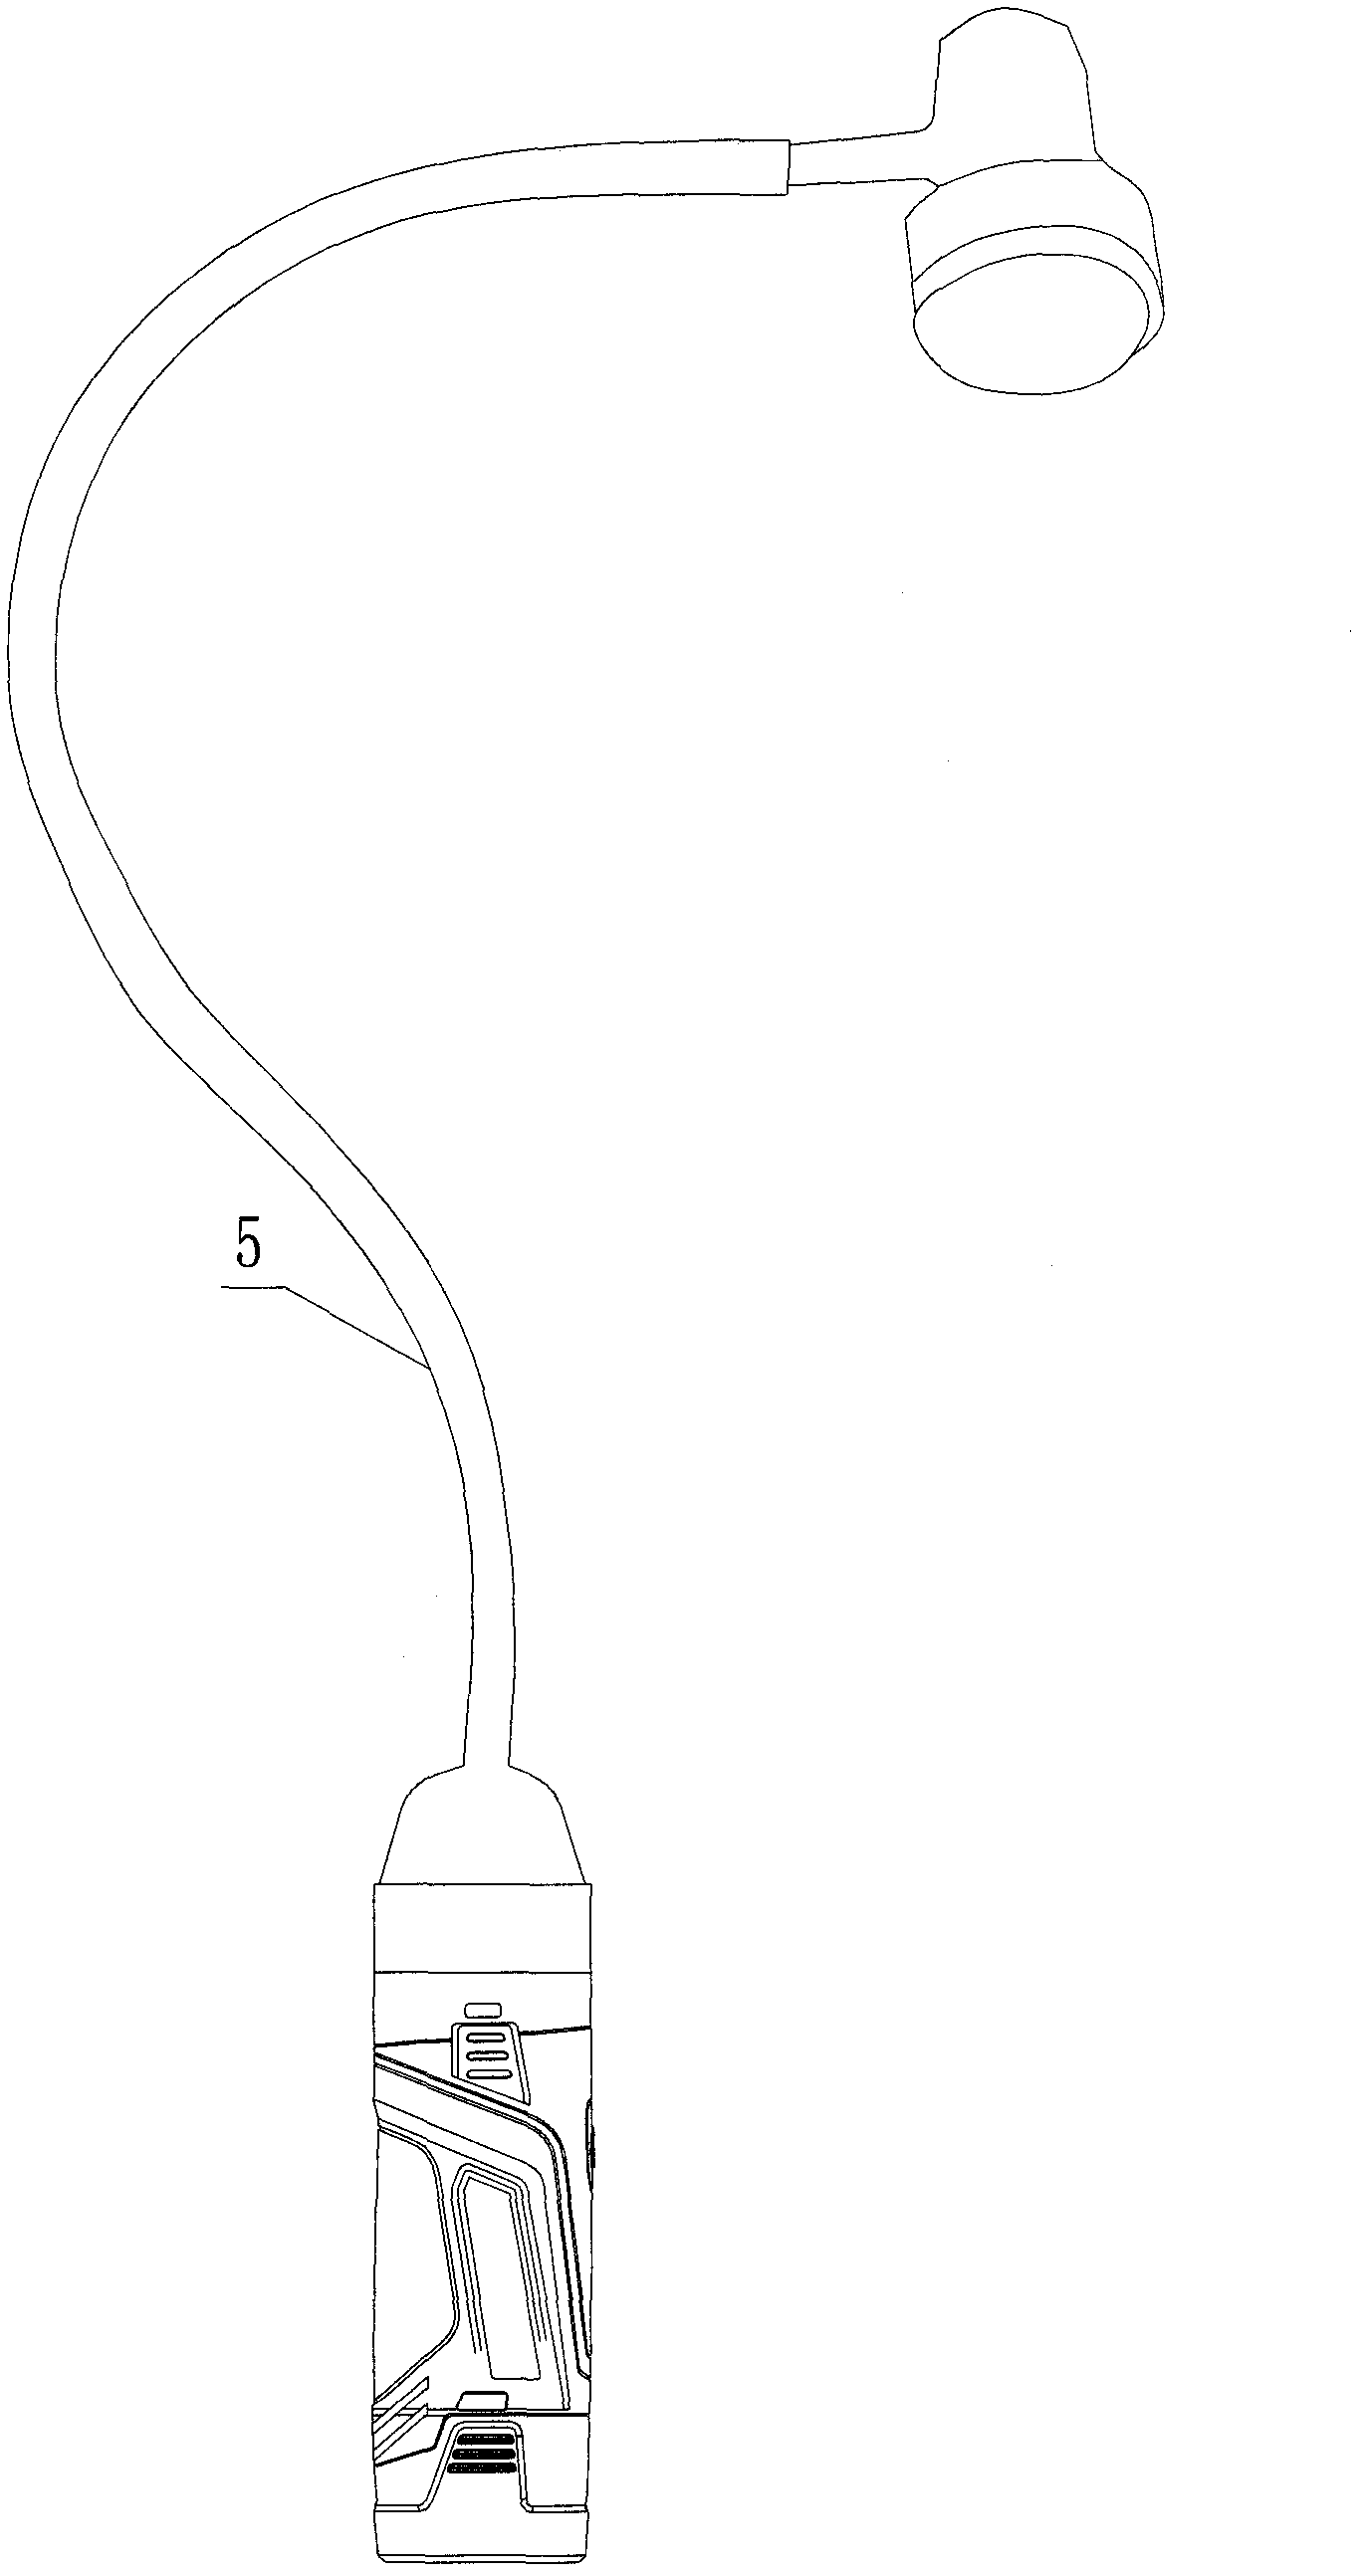 Structure capable of connecting with multiple types of functional heads on charging type flashlight